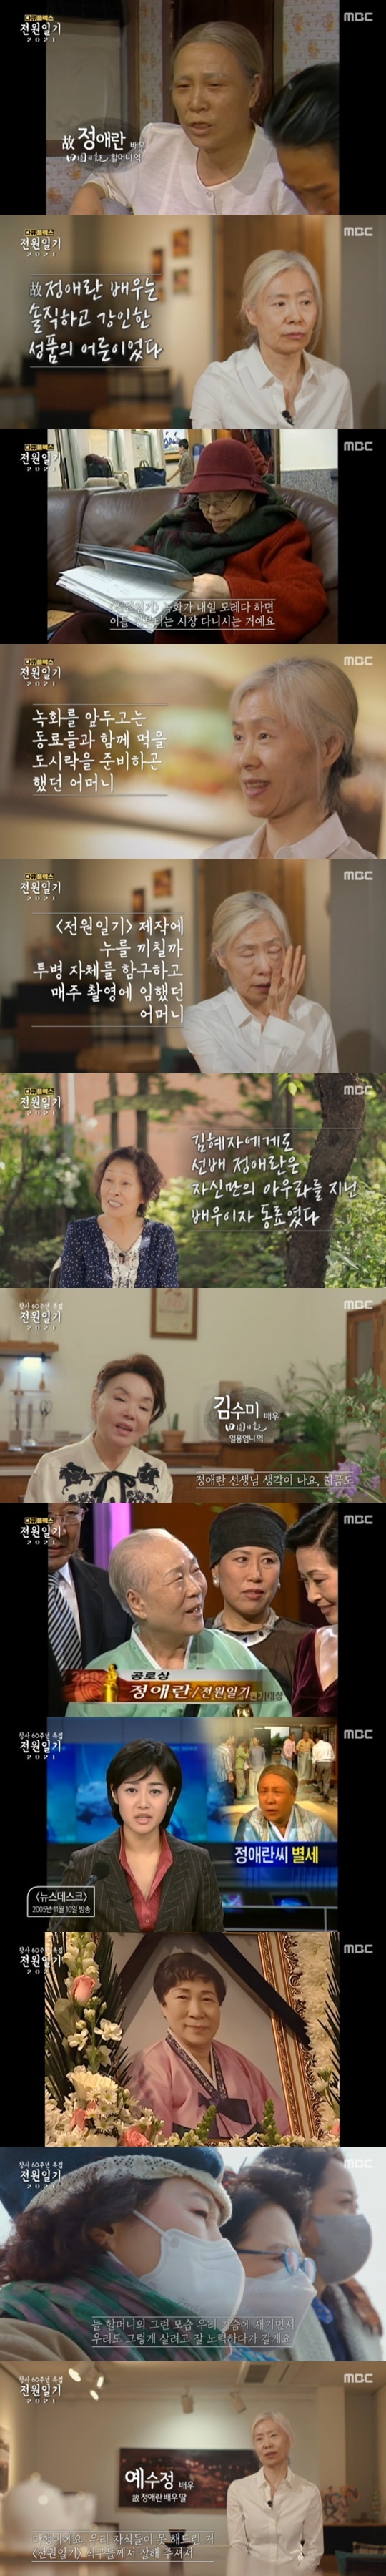 Seoul = = Actor Ye Soo-jung remembered his mother, Actor late Ae-ran Jeong, who had devoted her affection to the power diary.In MBCs current affairs program Document Flex broadcasted on the afternoon of the 25th, Power Diary 2021 part 2 Spring Day Goes was broadcast.The Power Diary, which has been ranked as a national drama with more than 40% audience rating since its broadcast on October 21, 1980, has been recorded as the longest ever Korean TV drama with 22 years of broadcasting.The main characters in the Power Diary, which recalled memories again, remembered Actor Ae-ran Jeong, who can not be together now.Ae-ran Jeong was the most laughing of the power diary and played a leading role as the mother of Kim (Choi Bul-am).The production team met Ae-ran Jeongs daughter, Actor Ye Soo-jung.Ye Soo-jung said of her mother, Ae-ran Jeong, I do not know as an actor, and to me, my mother.He was honest and hard, he added. He was a person who respects life and life regardless of the incidental name of entertainer and star. Ye Soo-jung recalled her mother Ae-ran Jeong, who stopped by the market two days before the day of filming the power diary, preparing lunch boxes for her colleagues.Ye Soo-jung said: I understand it when Im this old, how good it is to eat with my juniors.I remember that I was happy as a picnic, he said, remembering Ae-ran Jeong, who had a special affection for the power diary .Ae-ran Jeong was always burdened and sorry for the care of the production crew and colleagues, and he recorded it with a lung cancer battle hidden in the drama.She was also hospitalized alone without a Guardian without notifying her daughter Ye Soo-jung.Ye Soo-jung, who was in Germany at the time, was saddened by the fact that he learned of Ae-ran Jeongs lung cancer through his mother-in-law who heard the news of Ae-ran Jeongs illness in the newspaper.Ae-ran Jeong came to the point where it was not easy to distinguish things at the end of the broadcast, but he played a strong role and achieved his last wish that his life will hold up until the end of the power diary.Ae-ran Jeong received the Achievement Award in the year when the Power Diary was over, and died less than three years after the end of the Power Diary.Ae-ran Jeongs daughter, Actor Ye Soo-jung, said, I am glad that the family of the family and the family of the family did not do it because the background is family and the power diary.Following the maintenance of the deceased to spray it on the sea, Ae-ran Jeong fell asleep in the middle of the sea.On this day, Power Diary Kims three daughters-in-law, the eldest daughter-in-law Park Eun-youngs high school, the second daughter-in-law, Park Soon-cheon of Go Soon-young, and the youngest daughter-in-law, Nam Young Lee,On the other hand, MBC Document Flex is a compound word of documentary and flex. It is a program that shows various personal genres such as lectures, archives, sitcoms, and VR as well as authentic documentary. It is broadcast every Friday at 8:50 pm.